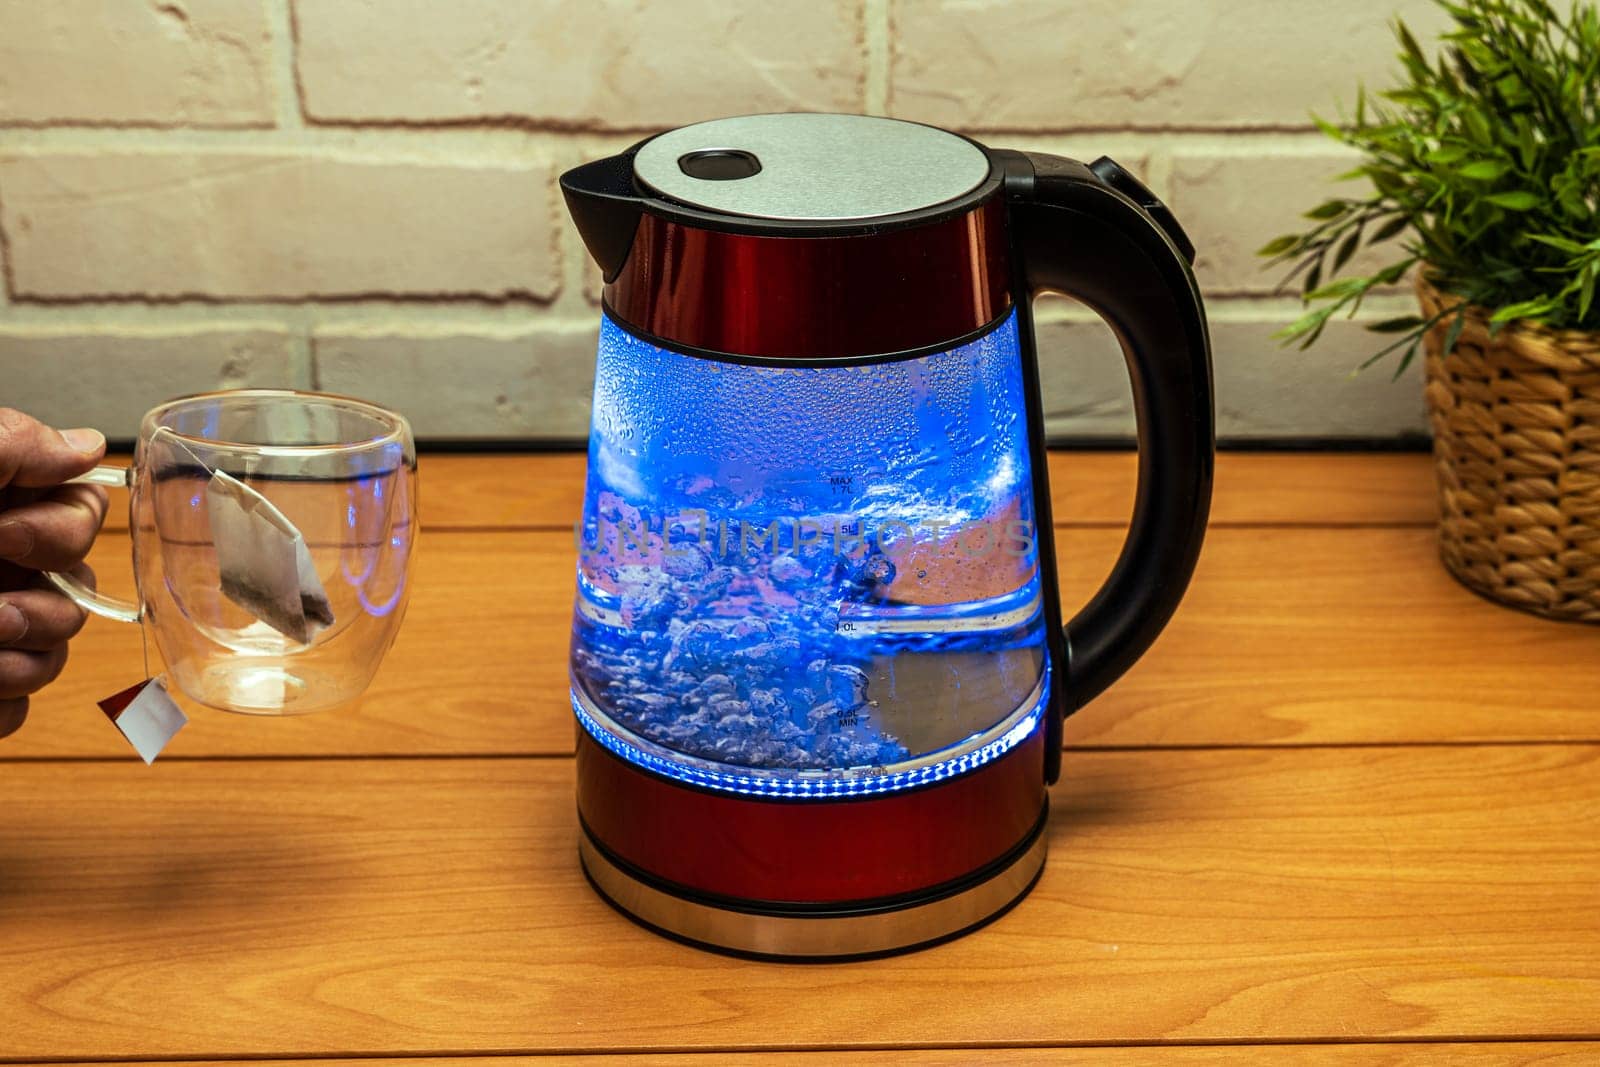 Brewing a tea bag. a fashionable tea cup with double glass walls and a modern electric transparent teapot with bubbling water and blue neon lighting on the table close-up.